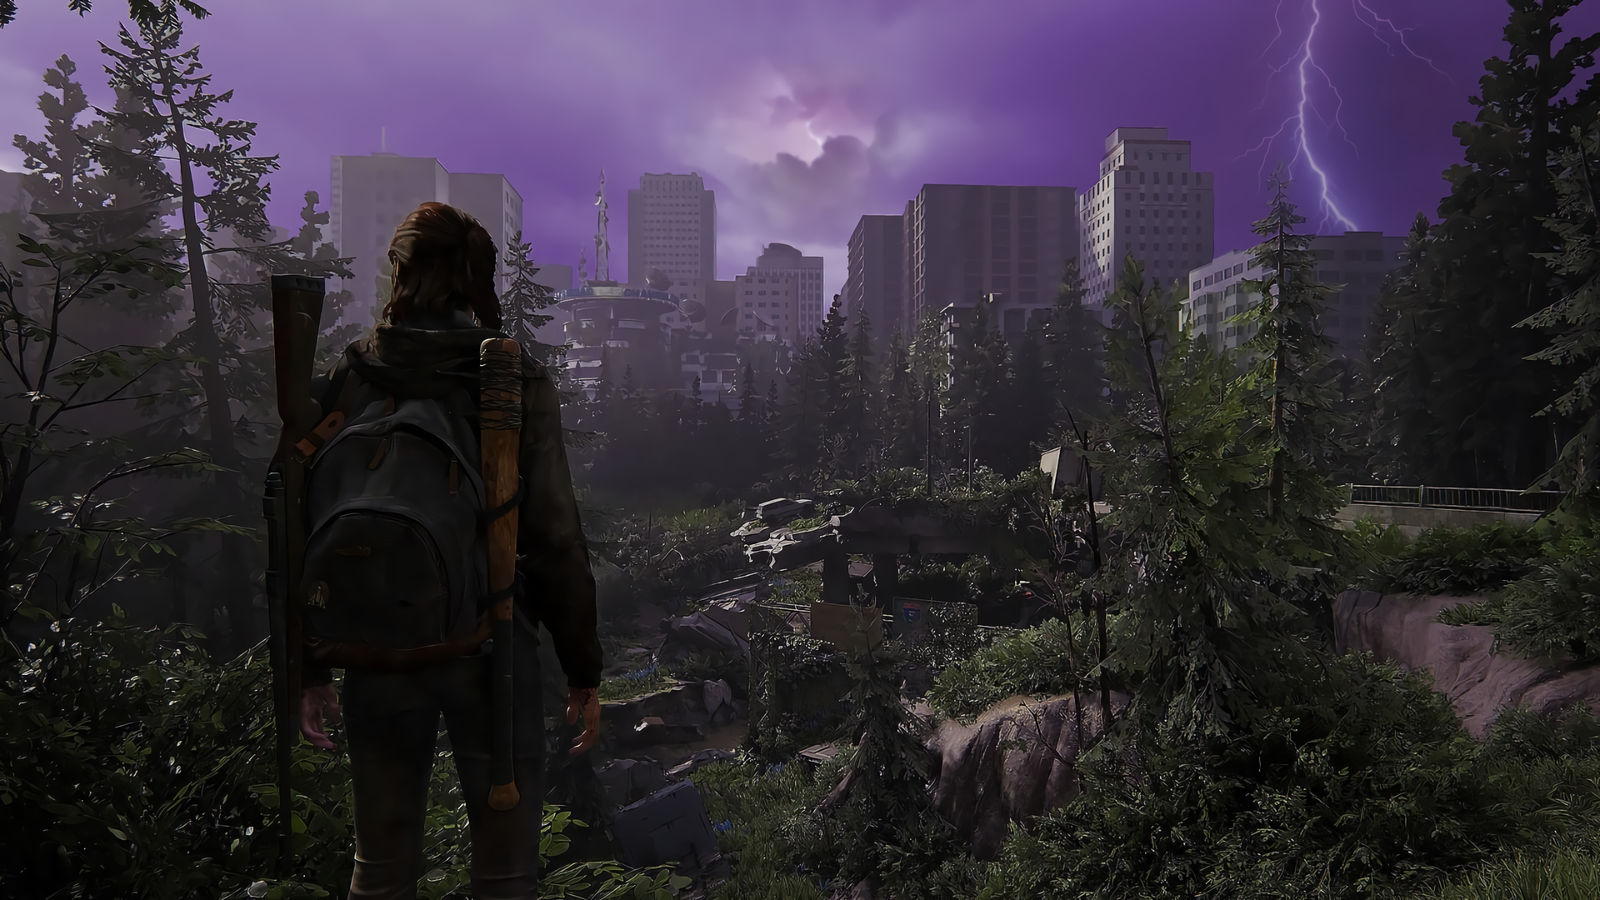 The Last Of Us Wallpaper (child ellie) by emrekyy1 on DeviantArt